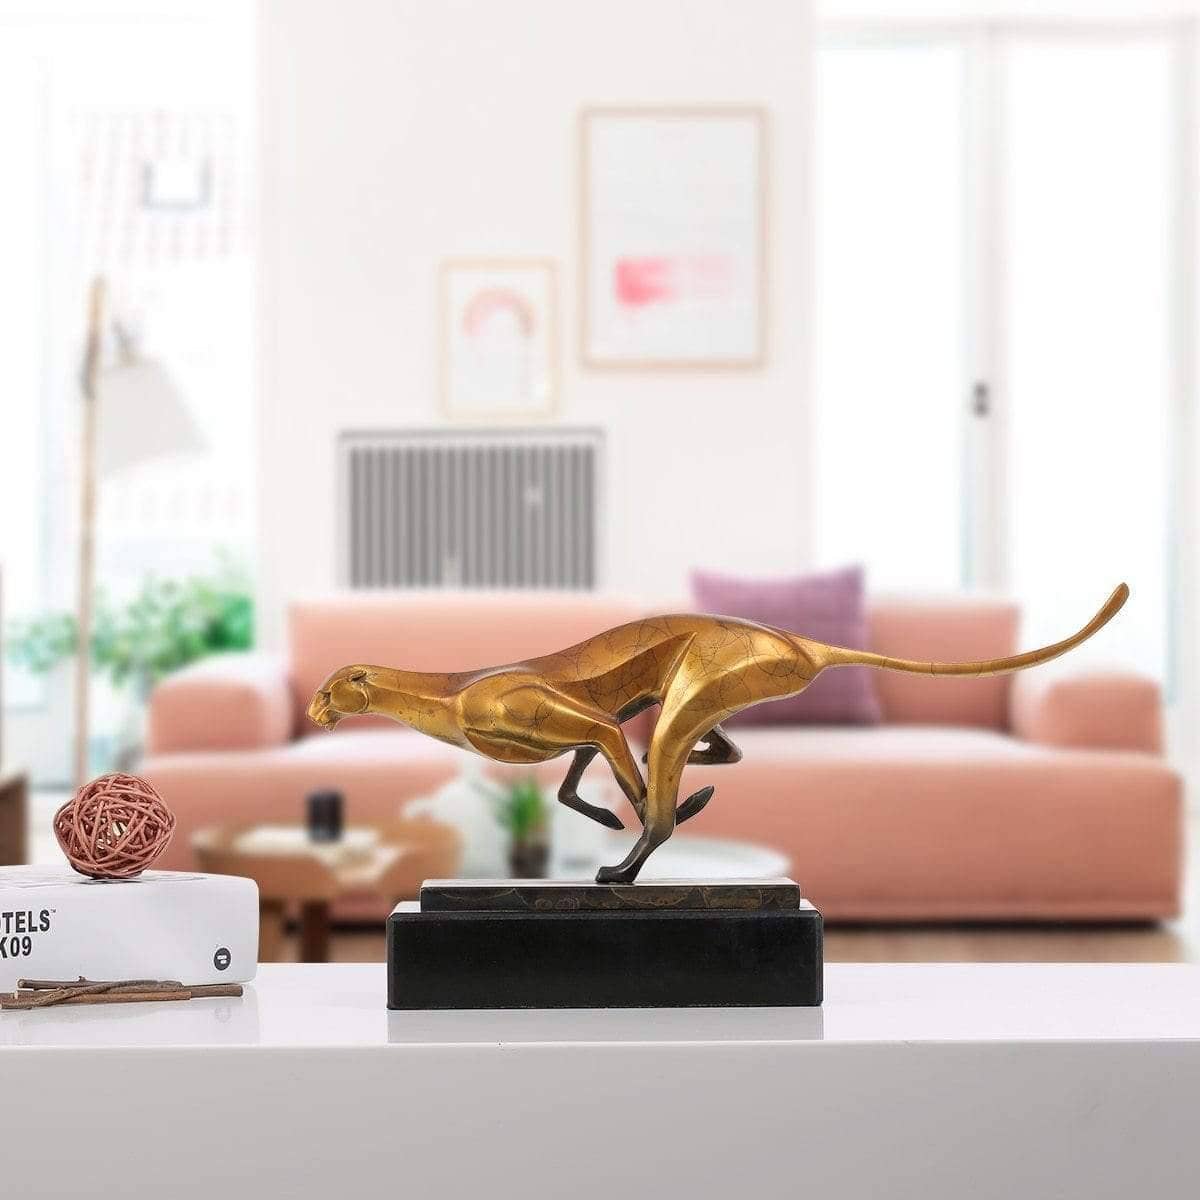 Artificial Bronze Leopard Modern Home Decor - Unique and Stylish Wildlife Touch